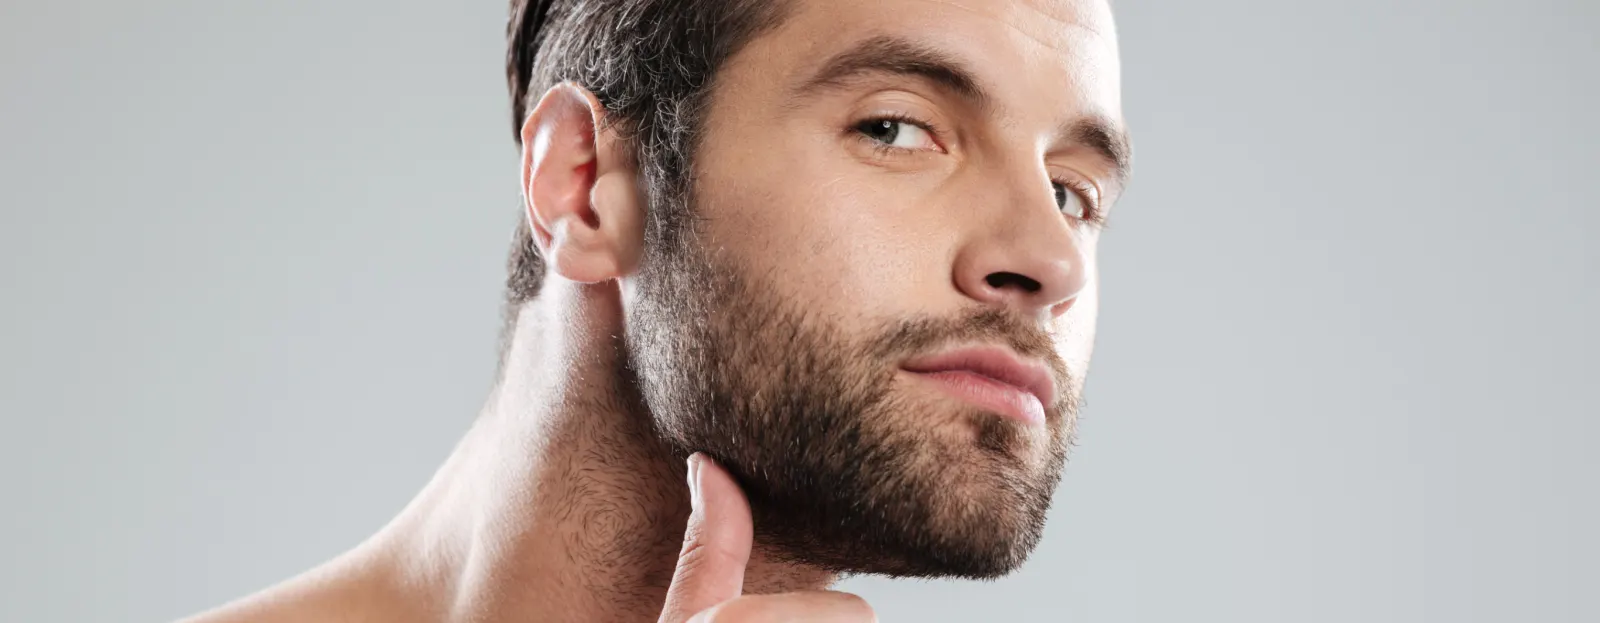 Beard facts that you probably did not know